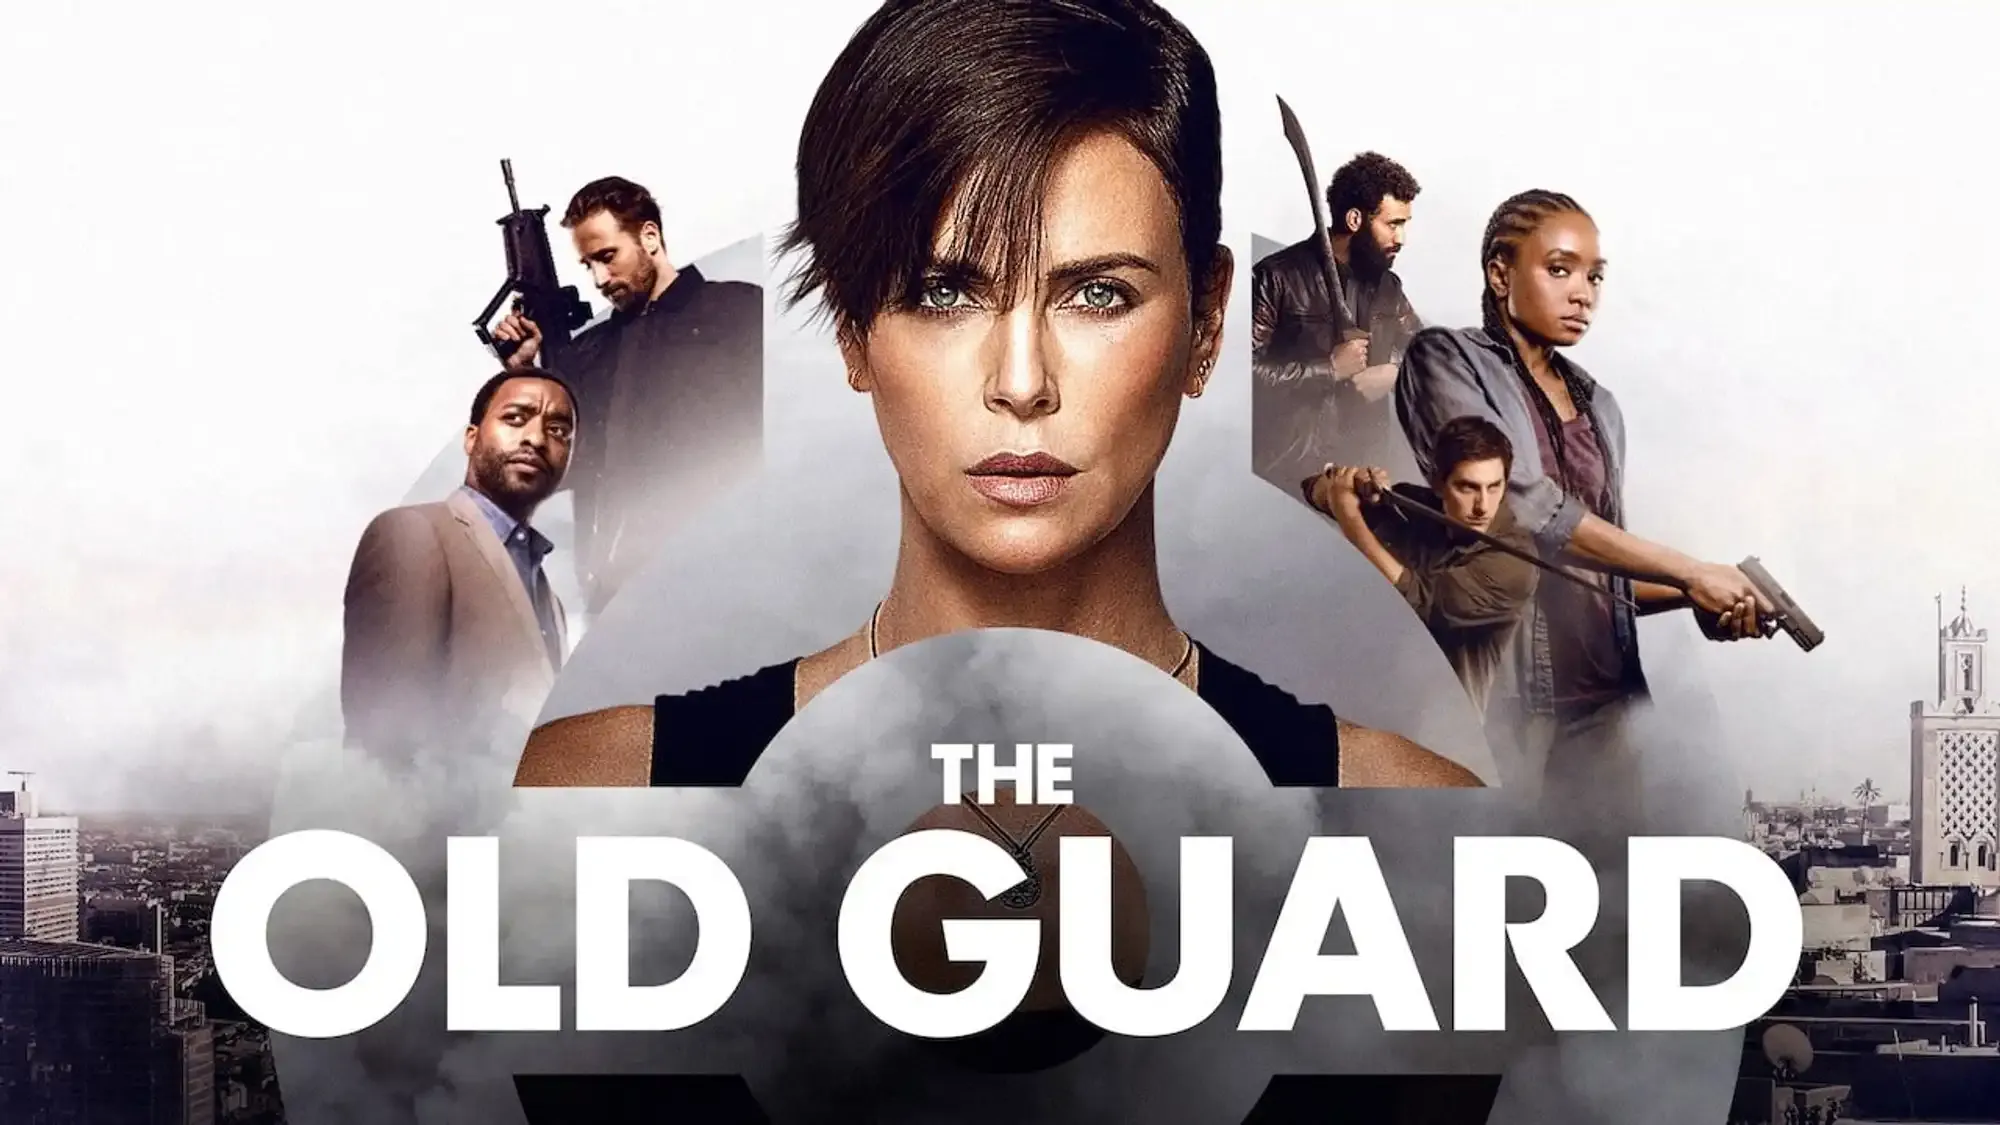 The Old Guard movie review